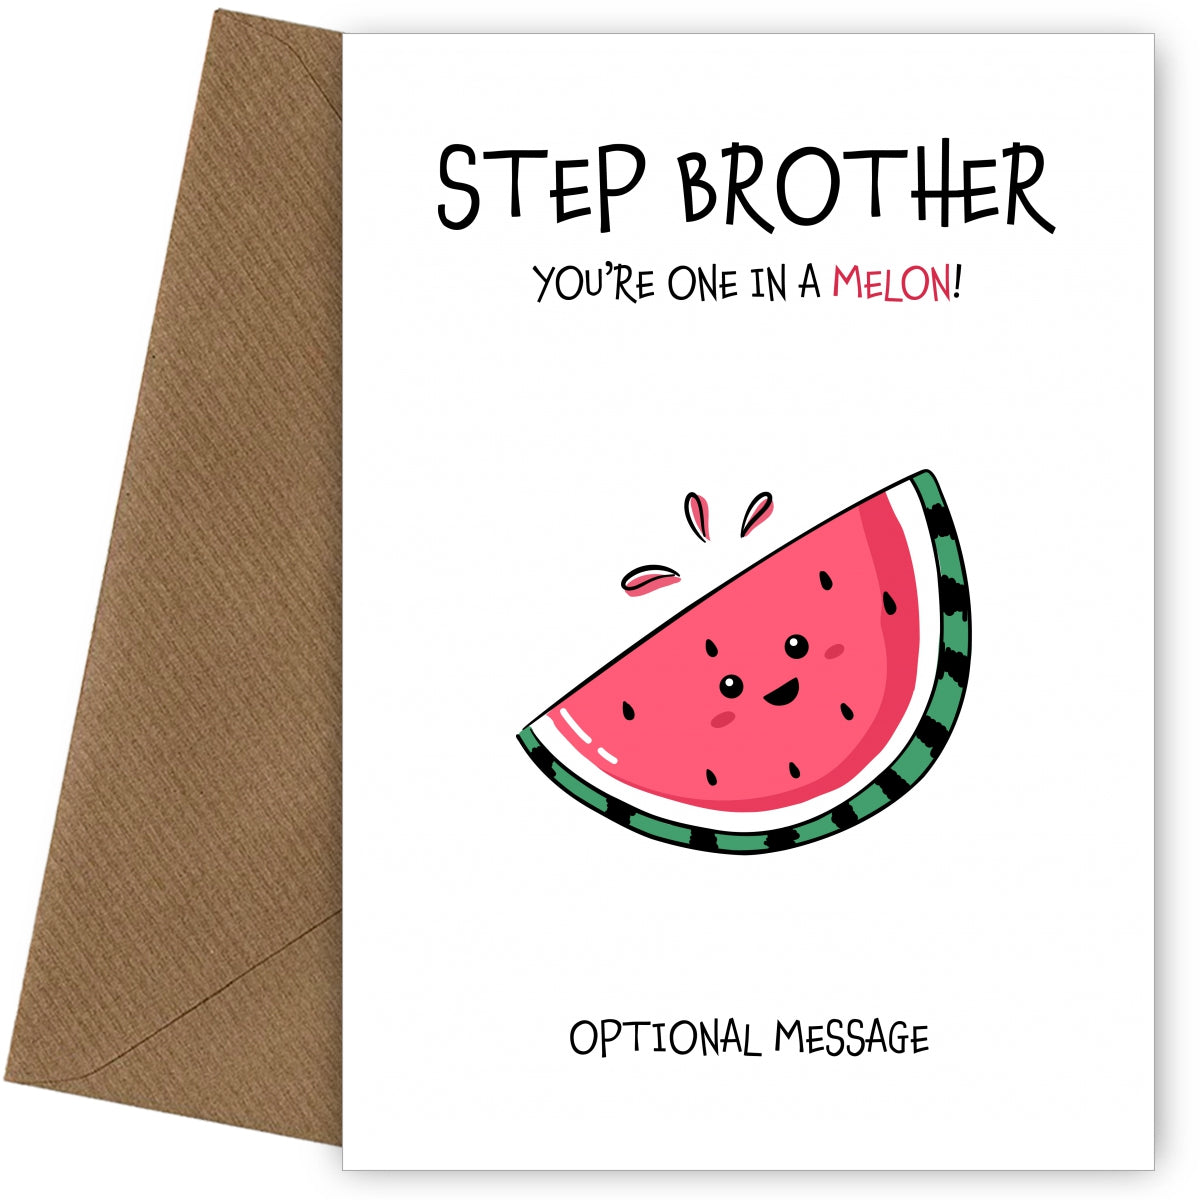 Fruit Pun Birthday Day Card for Step Brother - One in a Melon